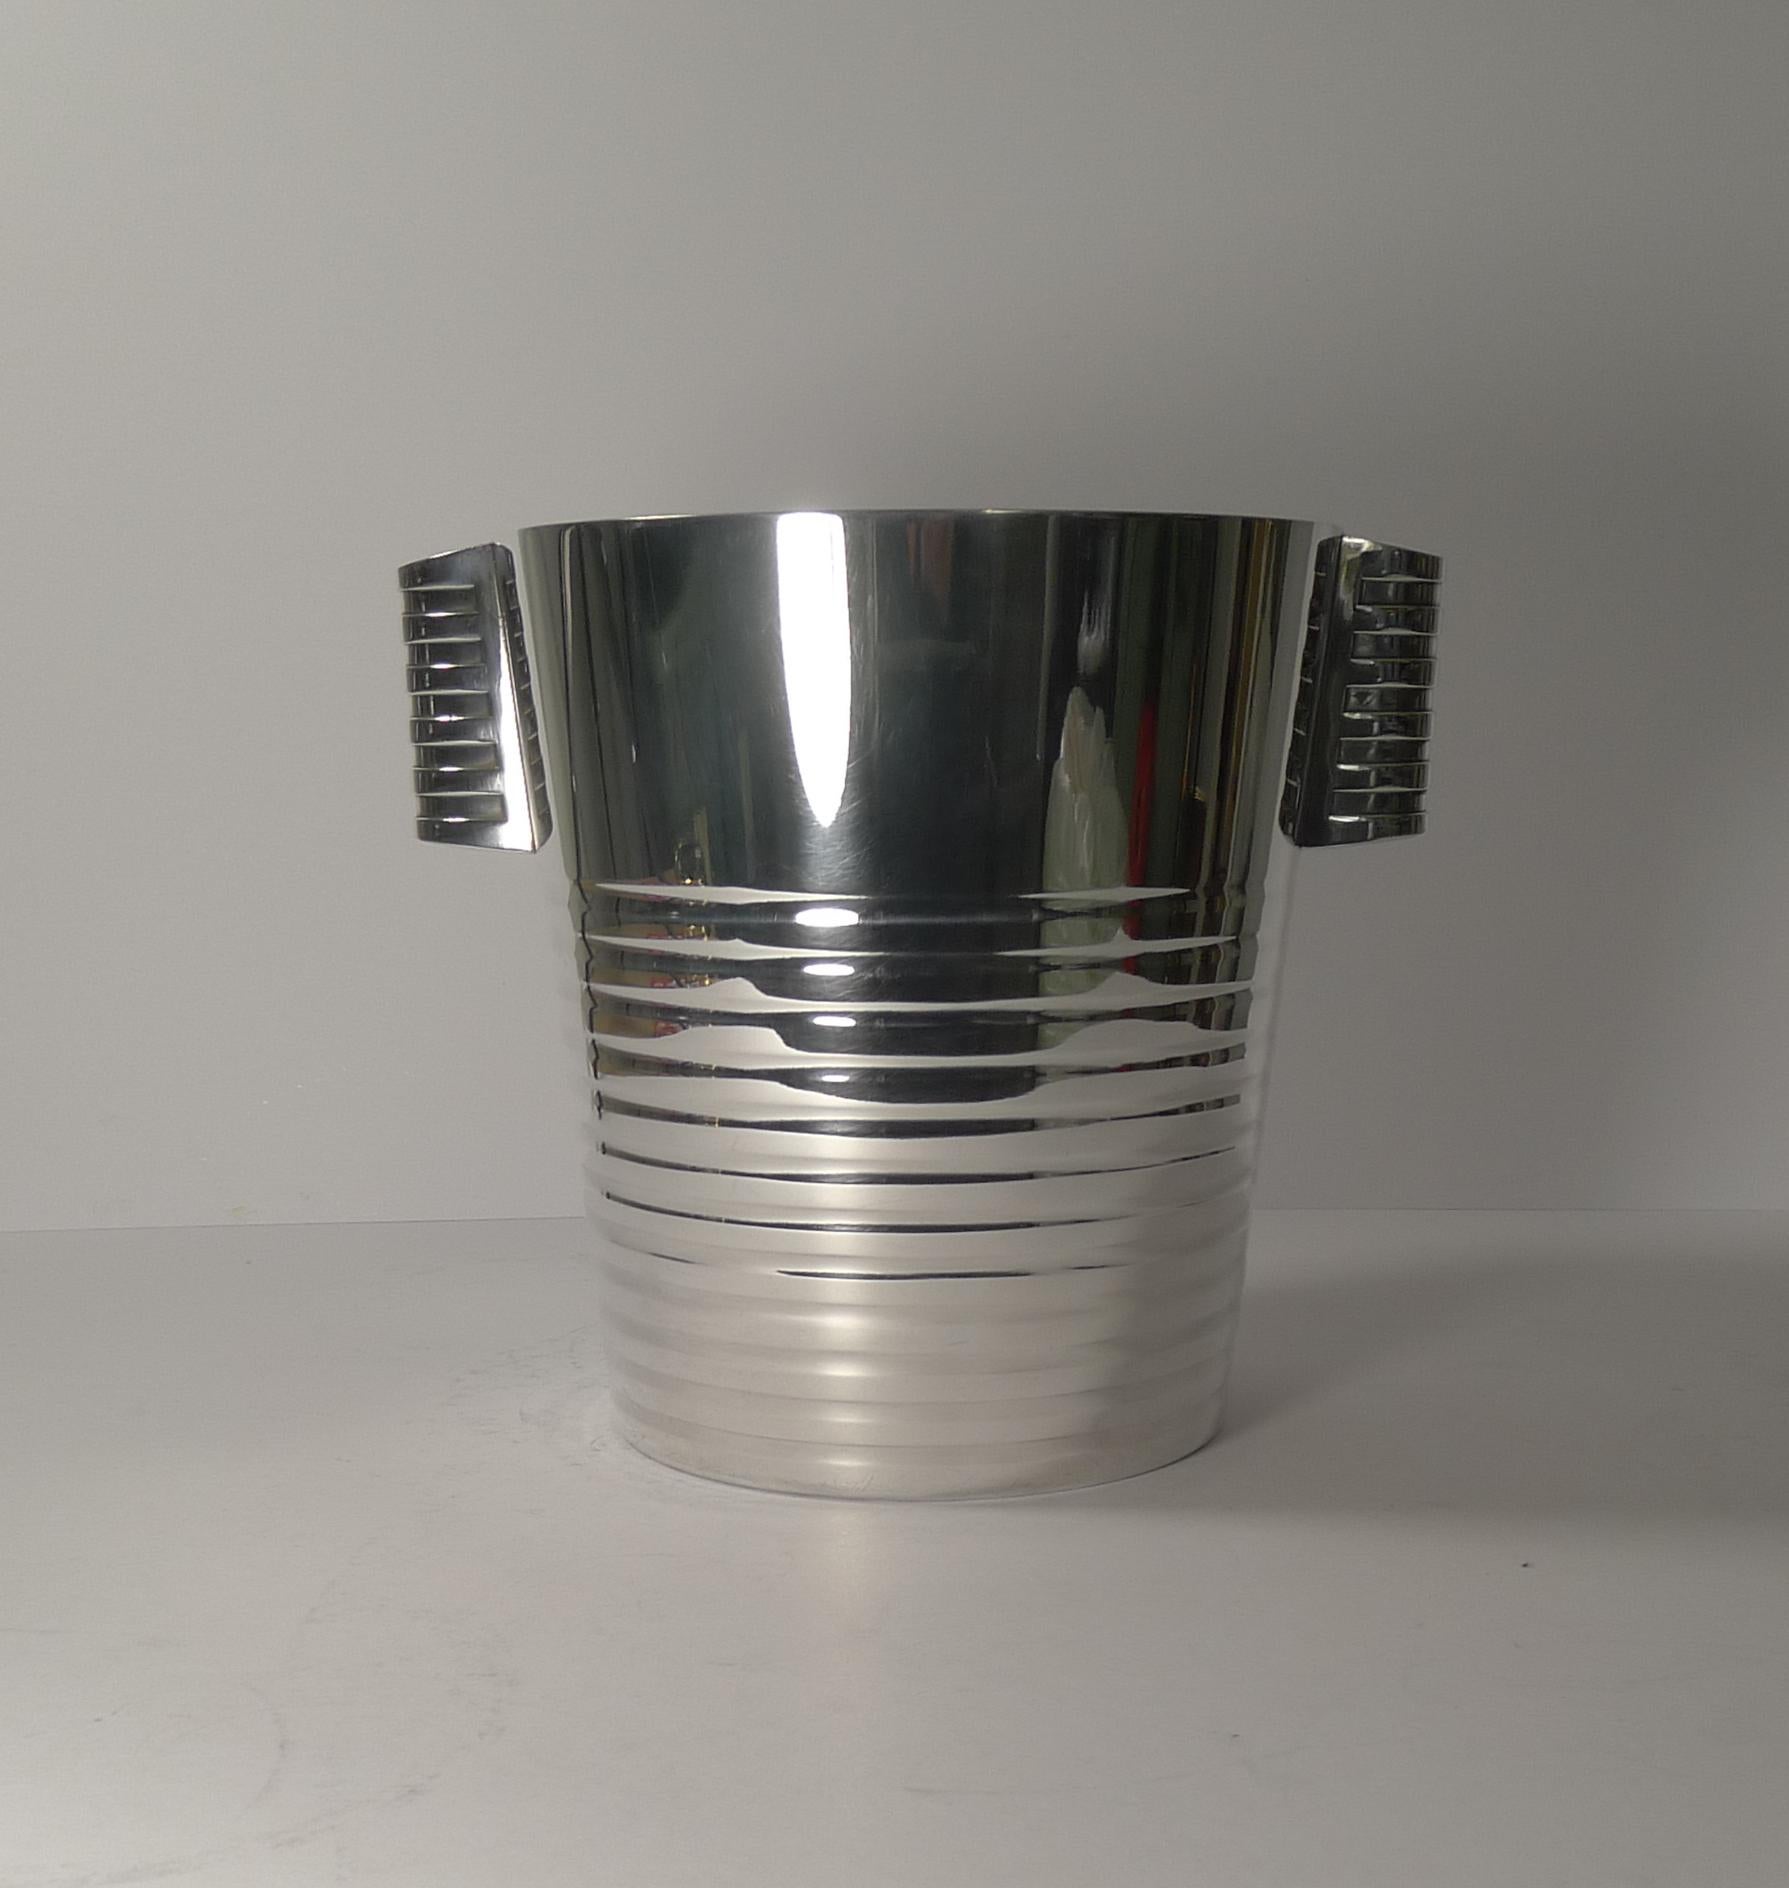 A fabulous Art Deco silver plated champagne bucket designed by the celebrated Luc Lanel for Christofle designed in1932. A stylish ribbed vessel with ribbed lug handles;

The pattern, called “Ondulations” was originally designed for the First Class